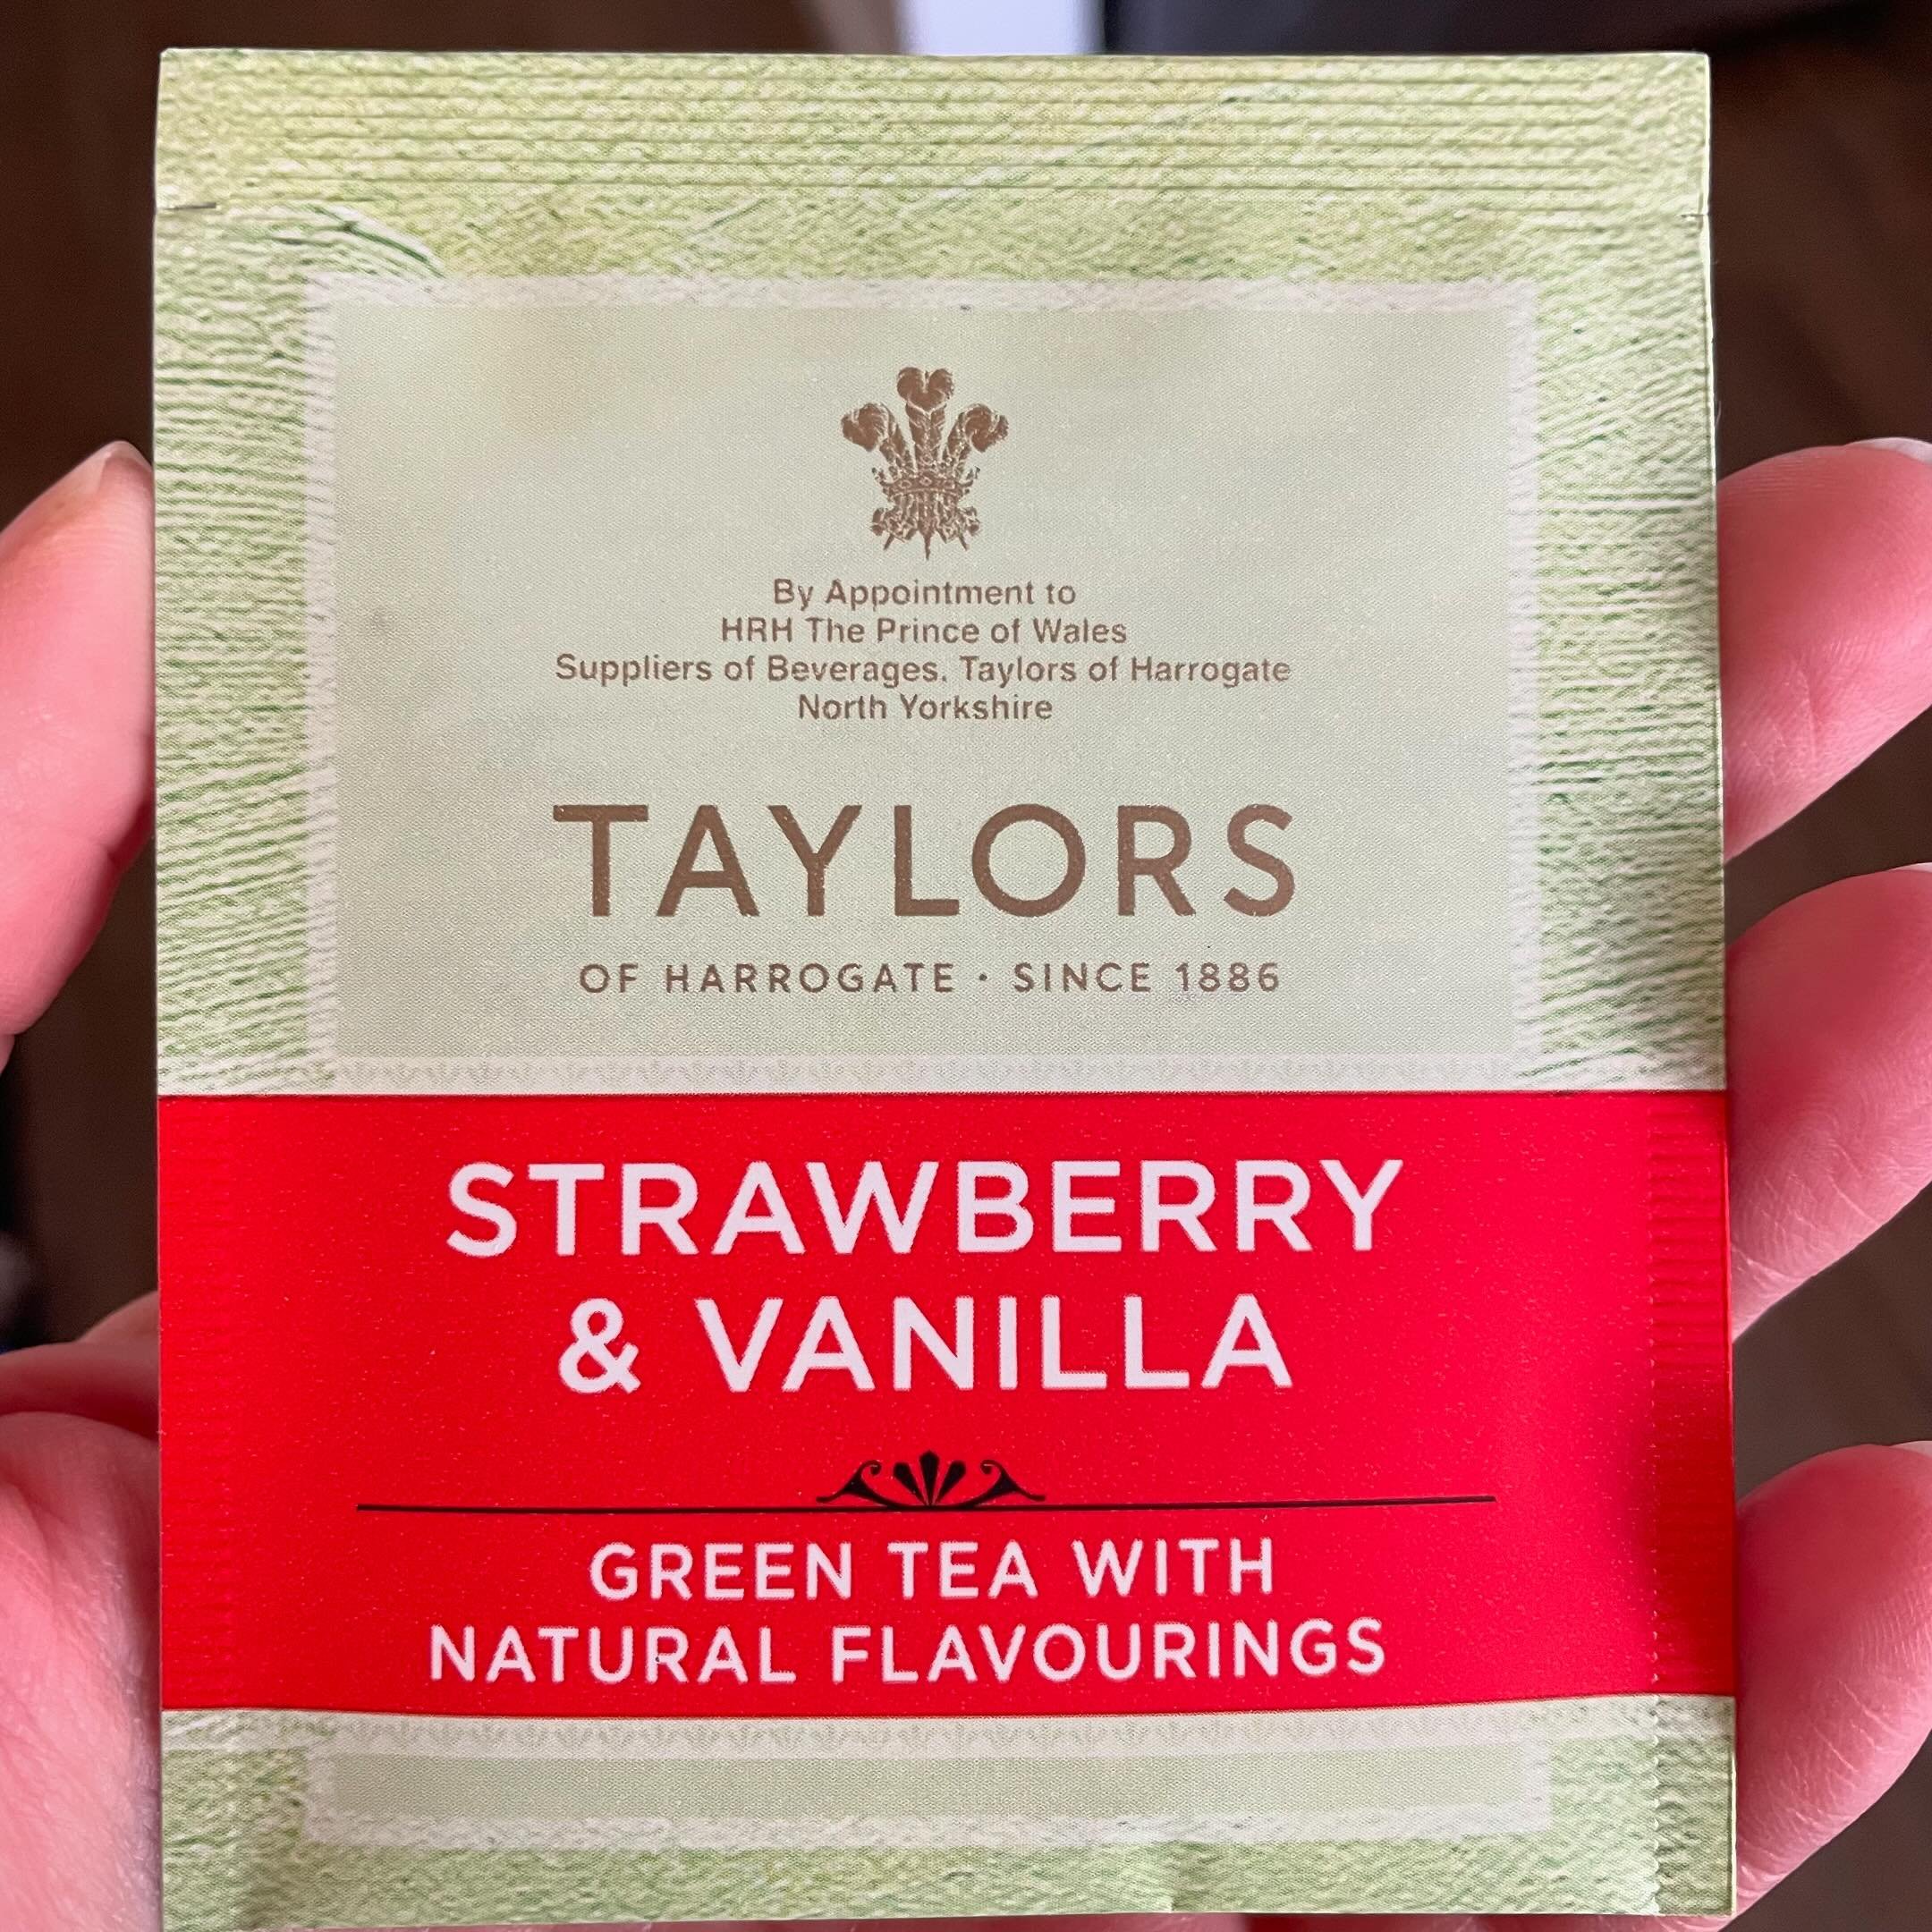 Y&rsquo;all, this is my new favorite tea. (And, due to this heat wave we&rsquo;re having, I can also attest to how wonderful it is iced!) Sometimes comfort comes in small packages.